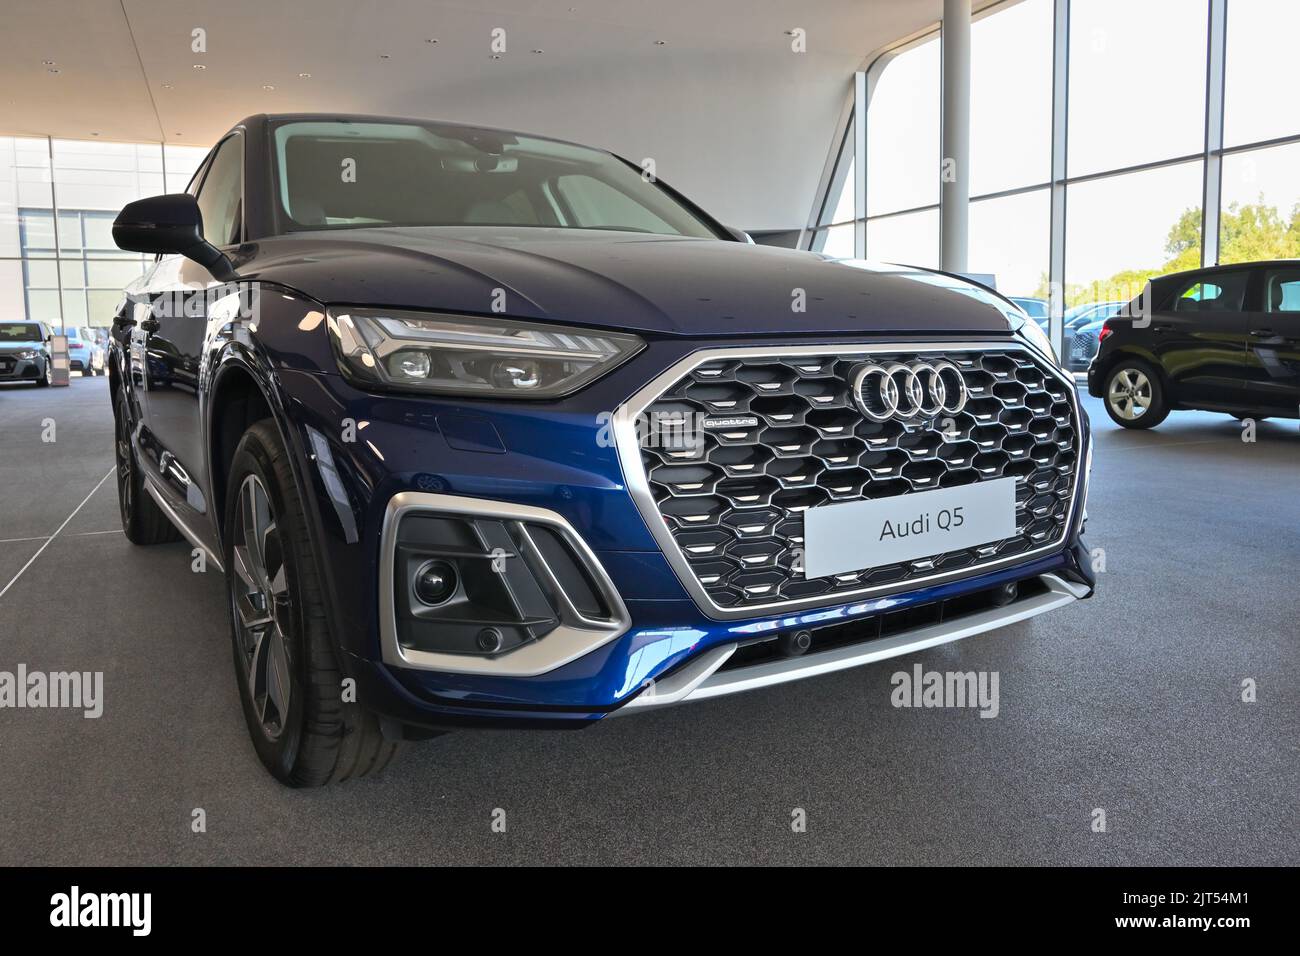 Gdansk, Poland - August 27, 2022: New model of Audi Q5 presented in the car showroom of Gdansk Stock Photo